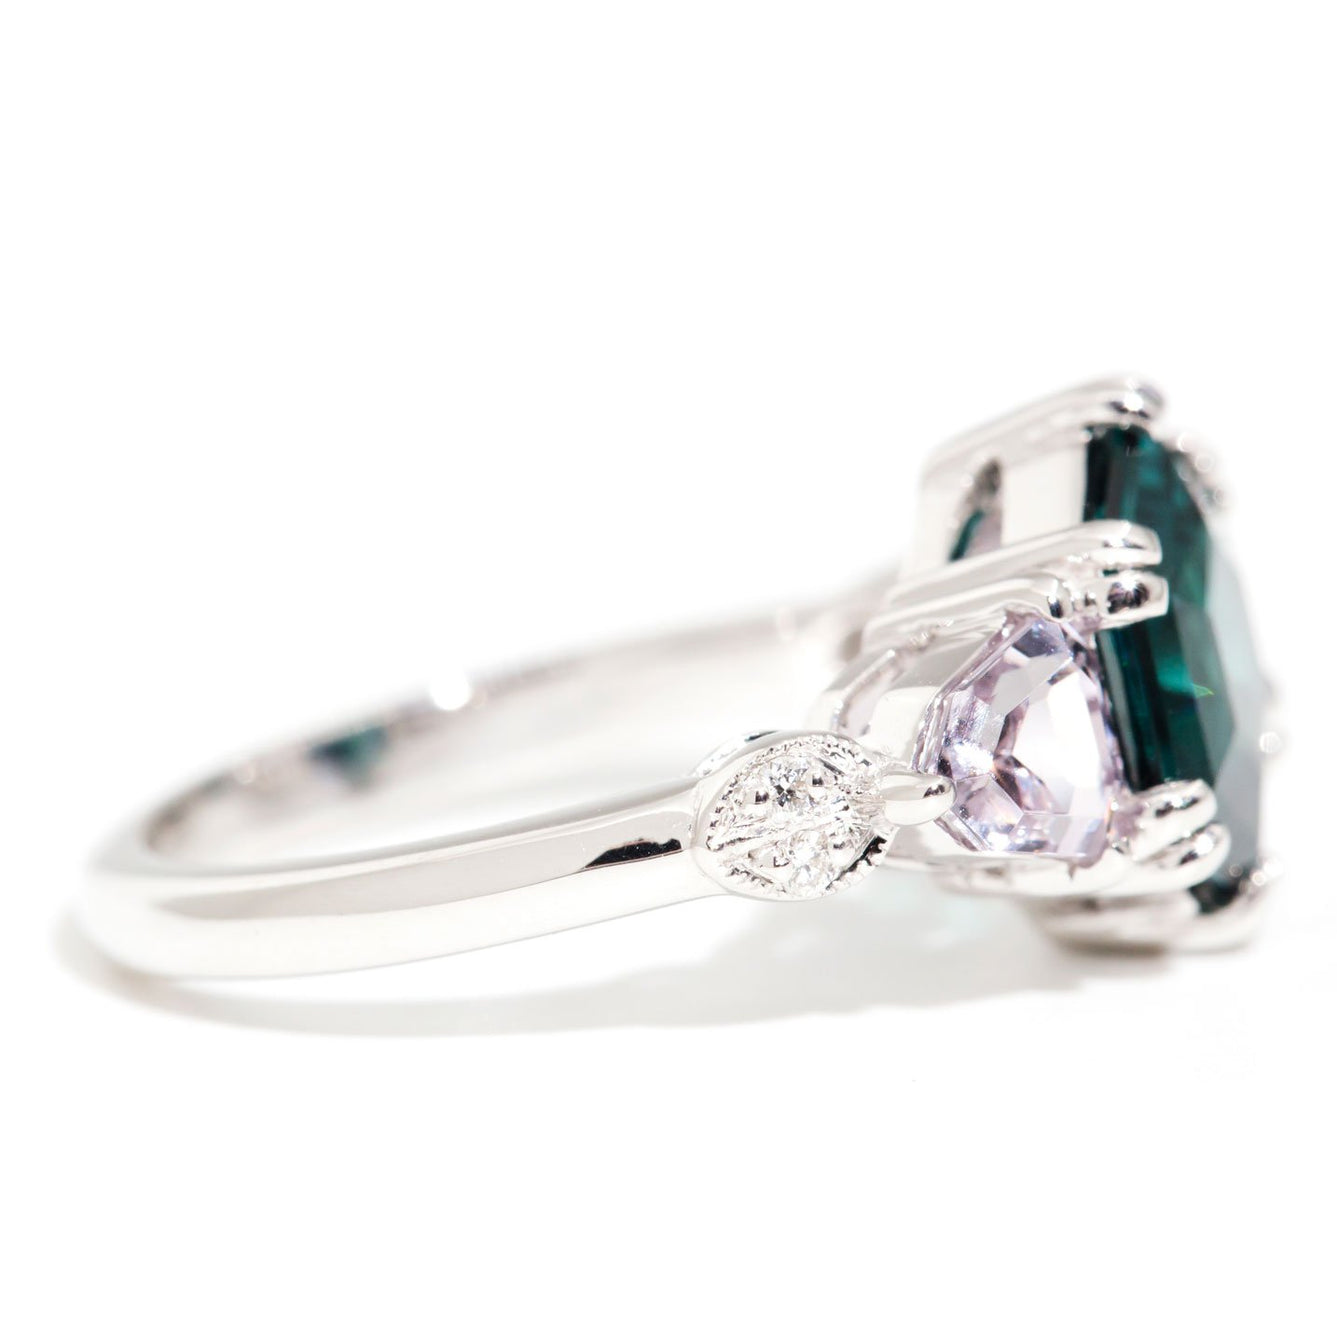 Maeve 2.46 Carat Teal Tourmaline & Spinel & Diamond Ring Rings Imperial Jewellery